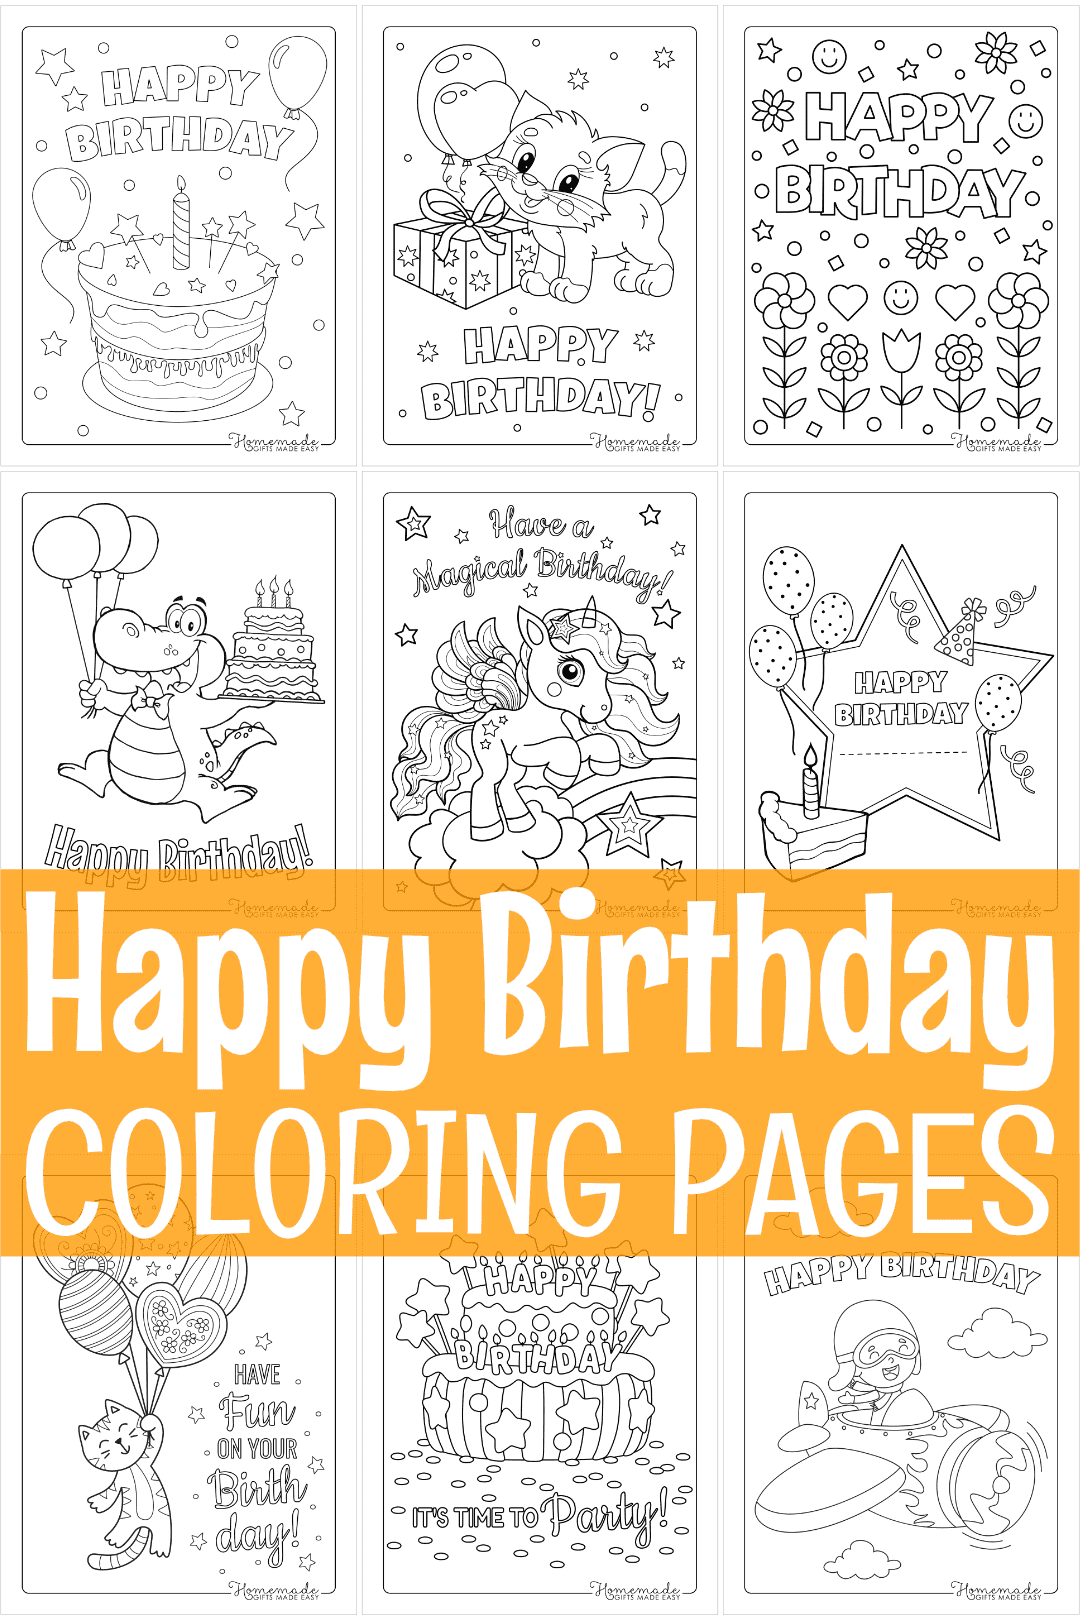 happy birthday coloring pages - star certificate